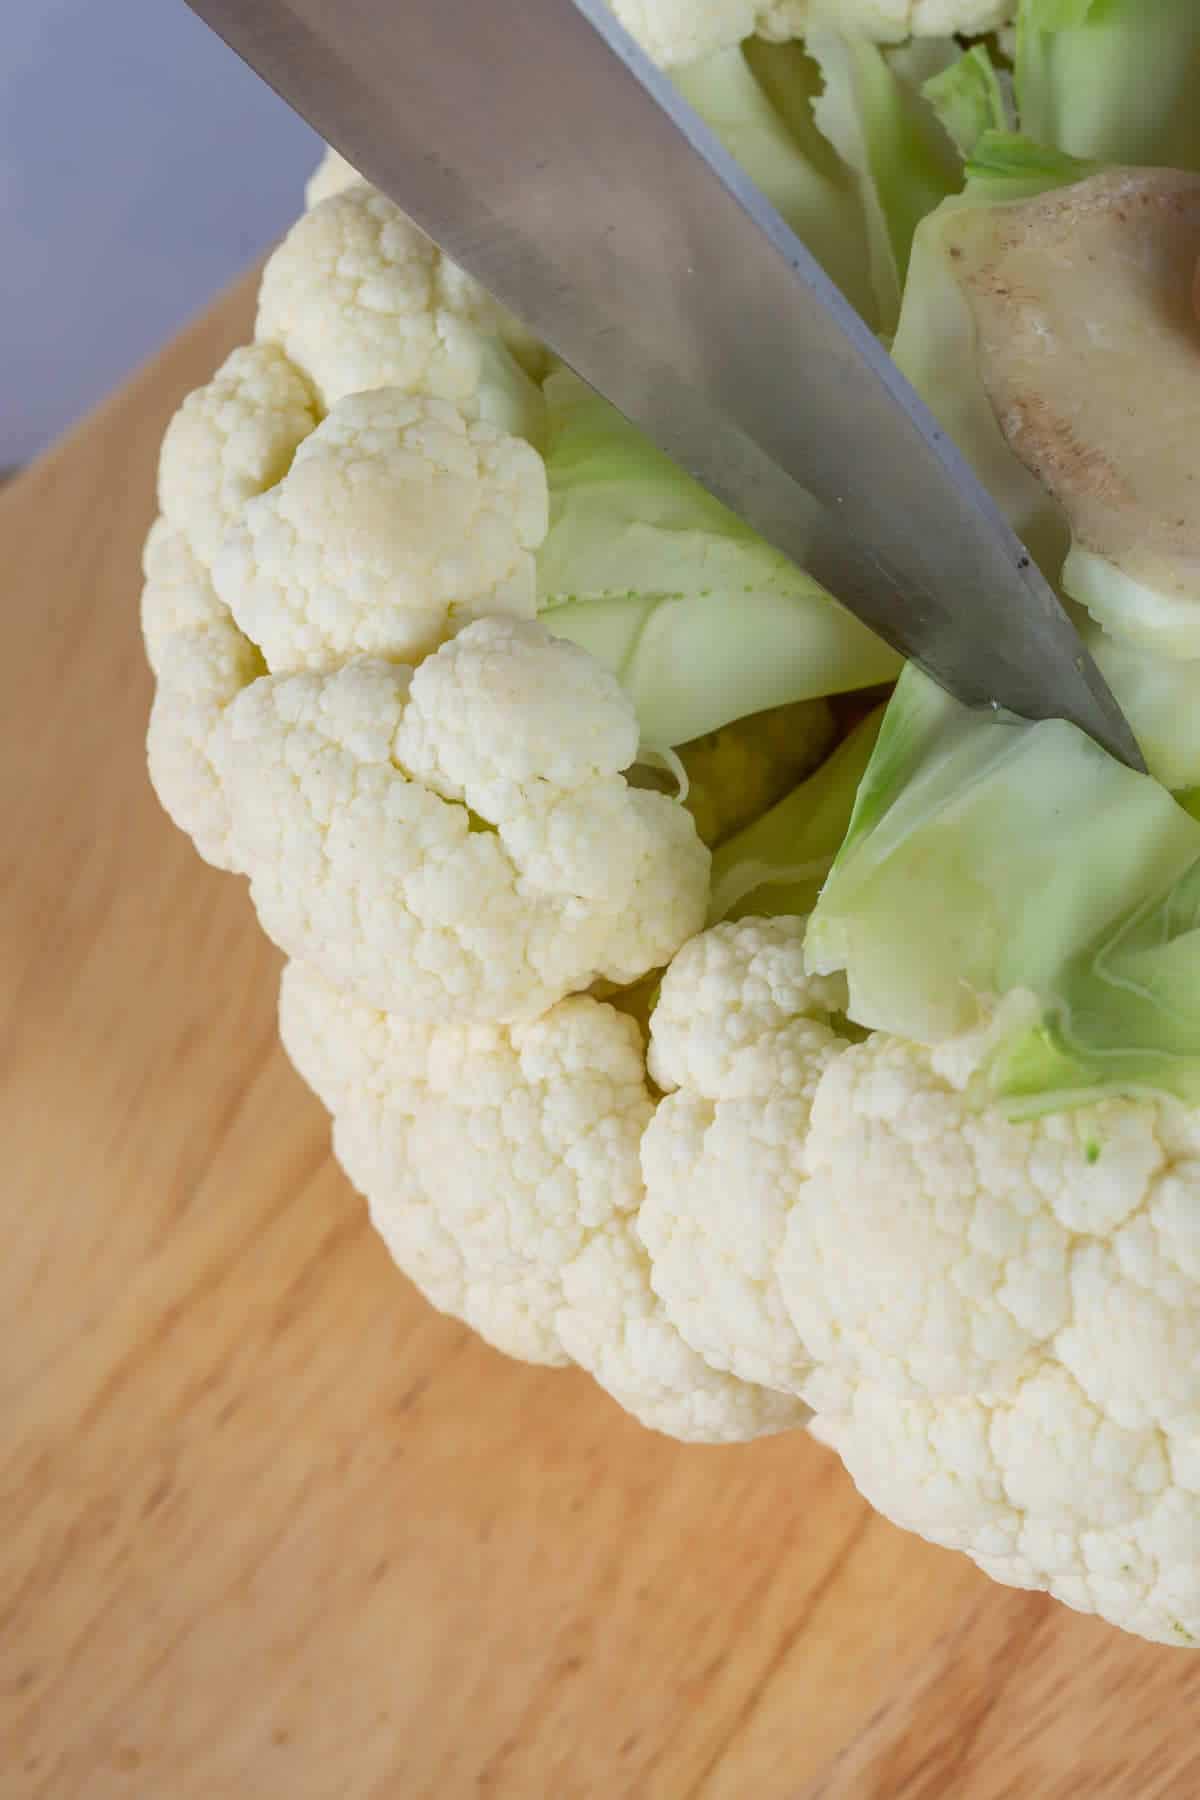 Snipping cauliflower florets from stem.